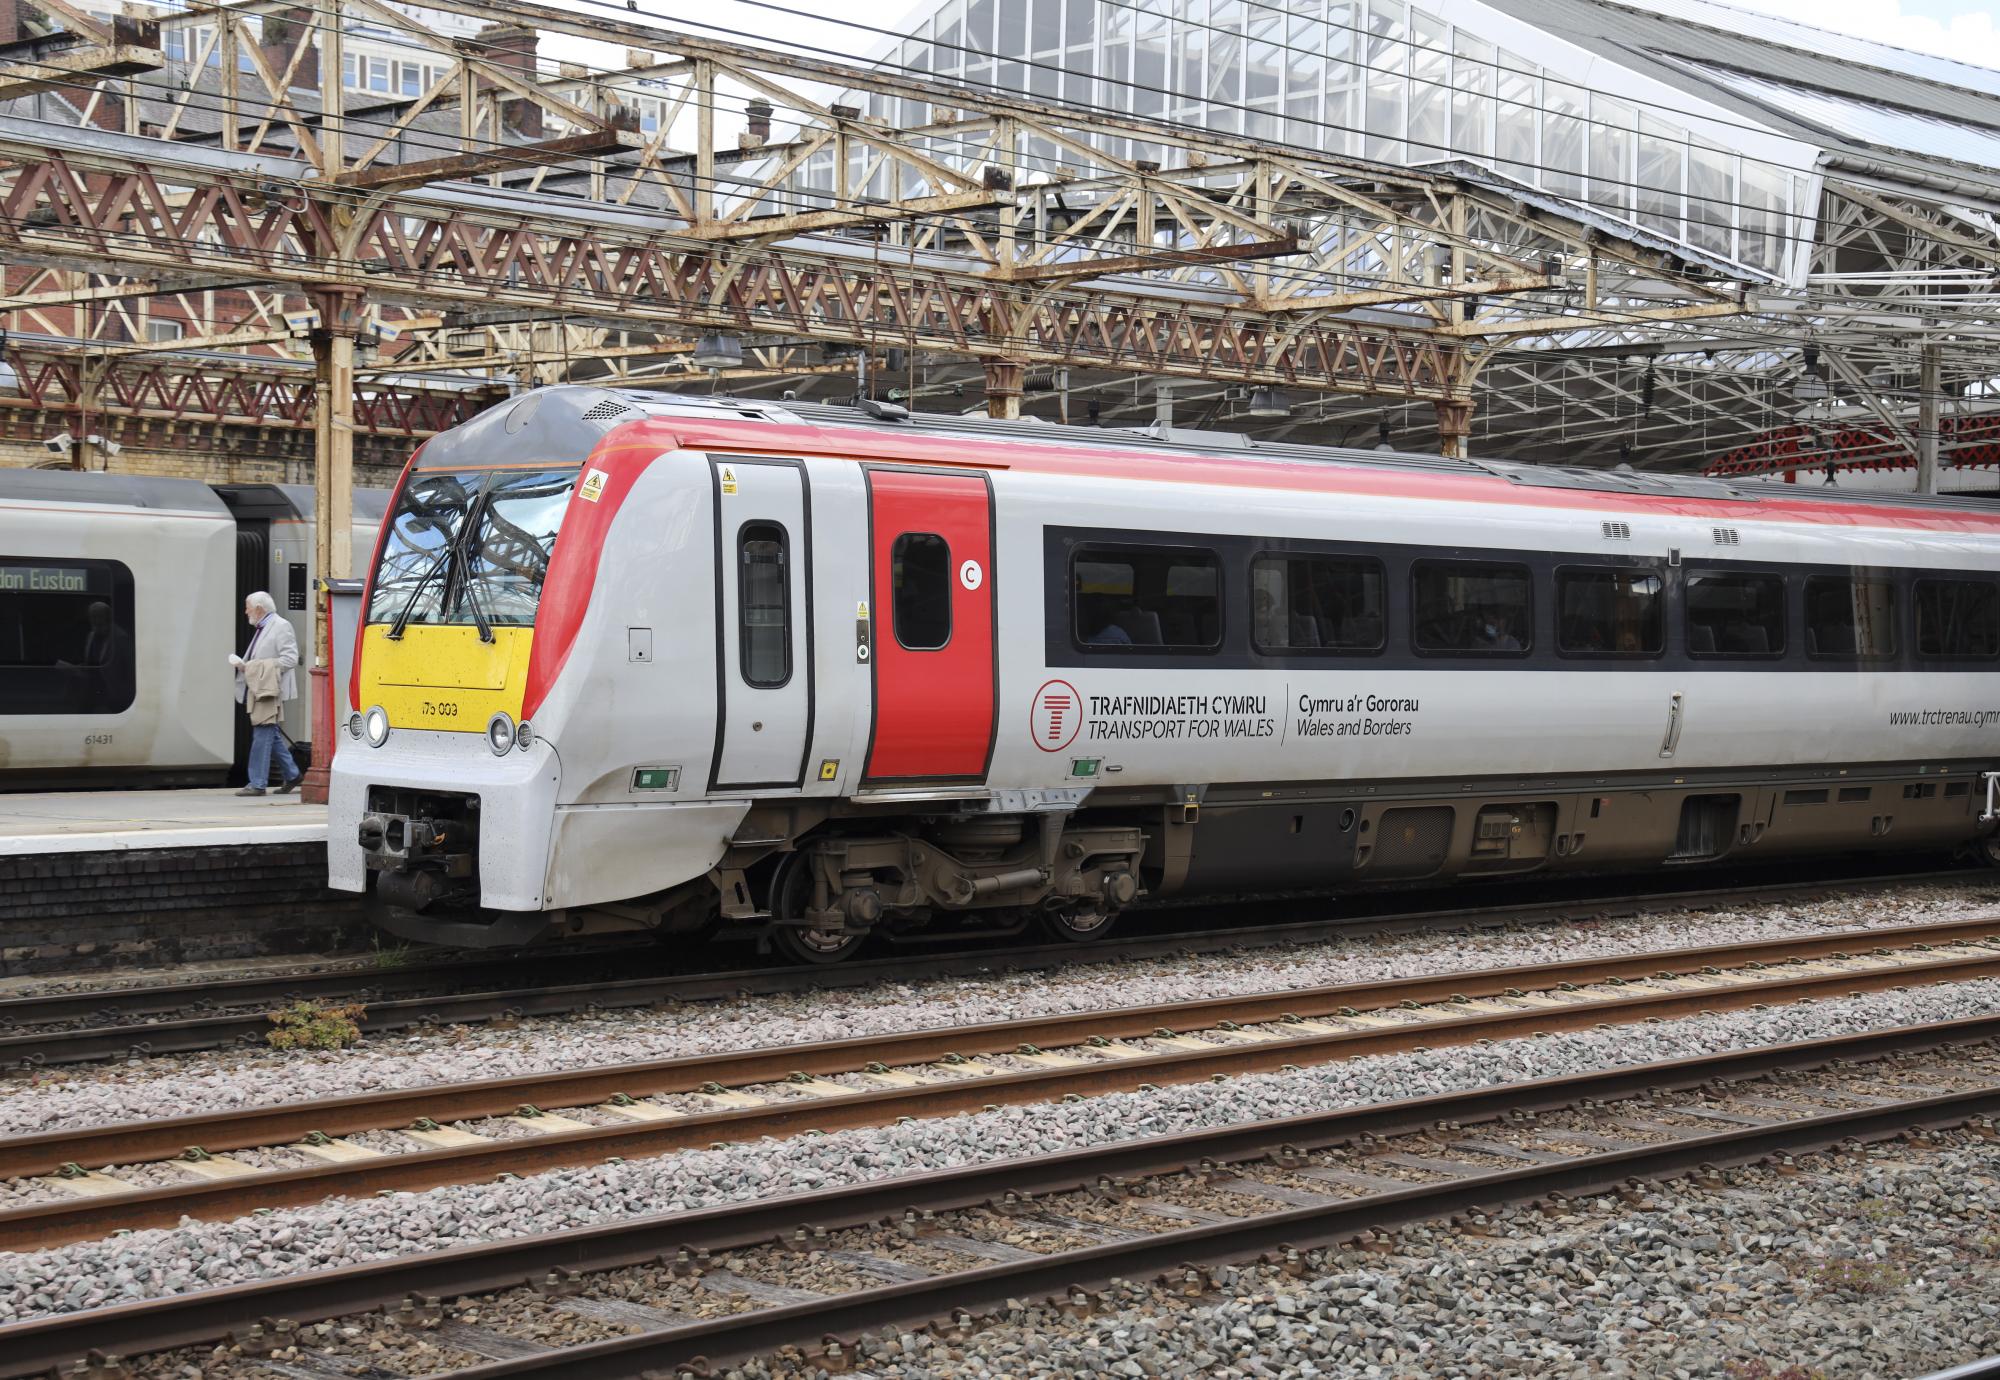 Transport for Wales Passenger Train at Crewe Railway Station